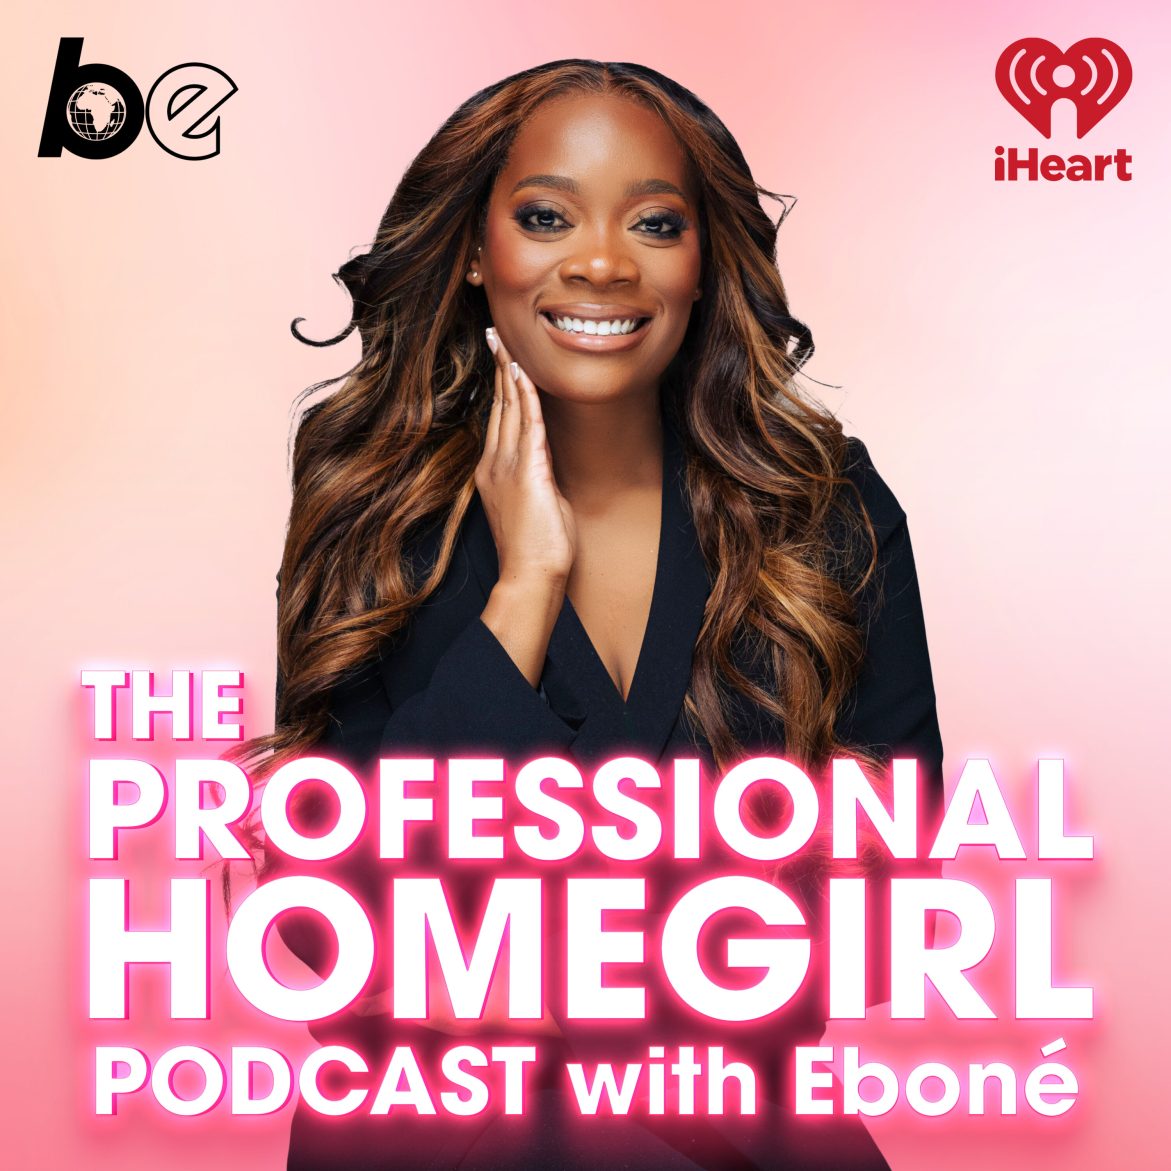 Black Podcasting - A Girls' Night Out Turned Me Into An Amputee